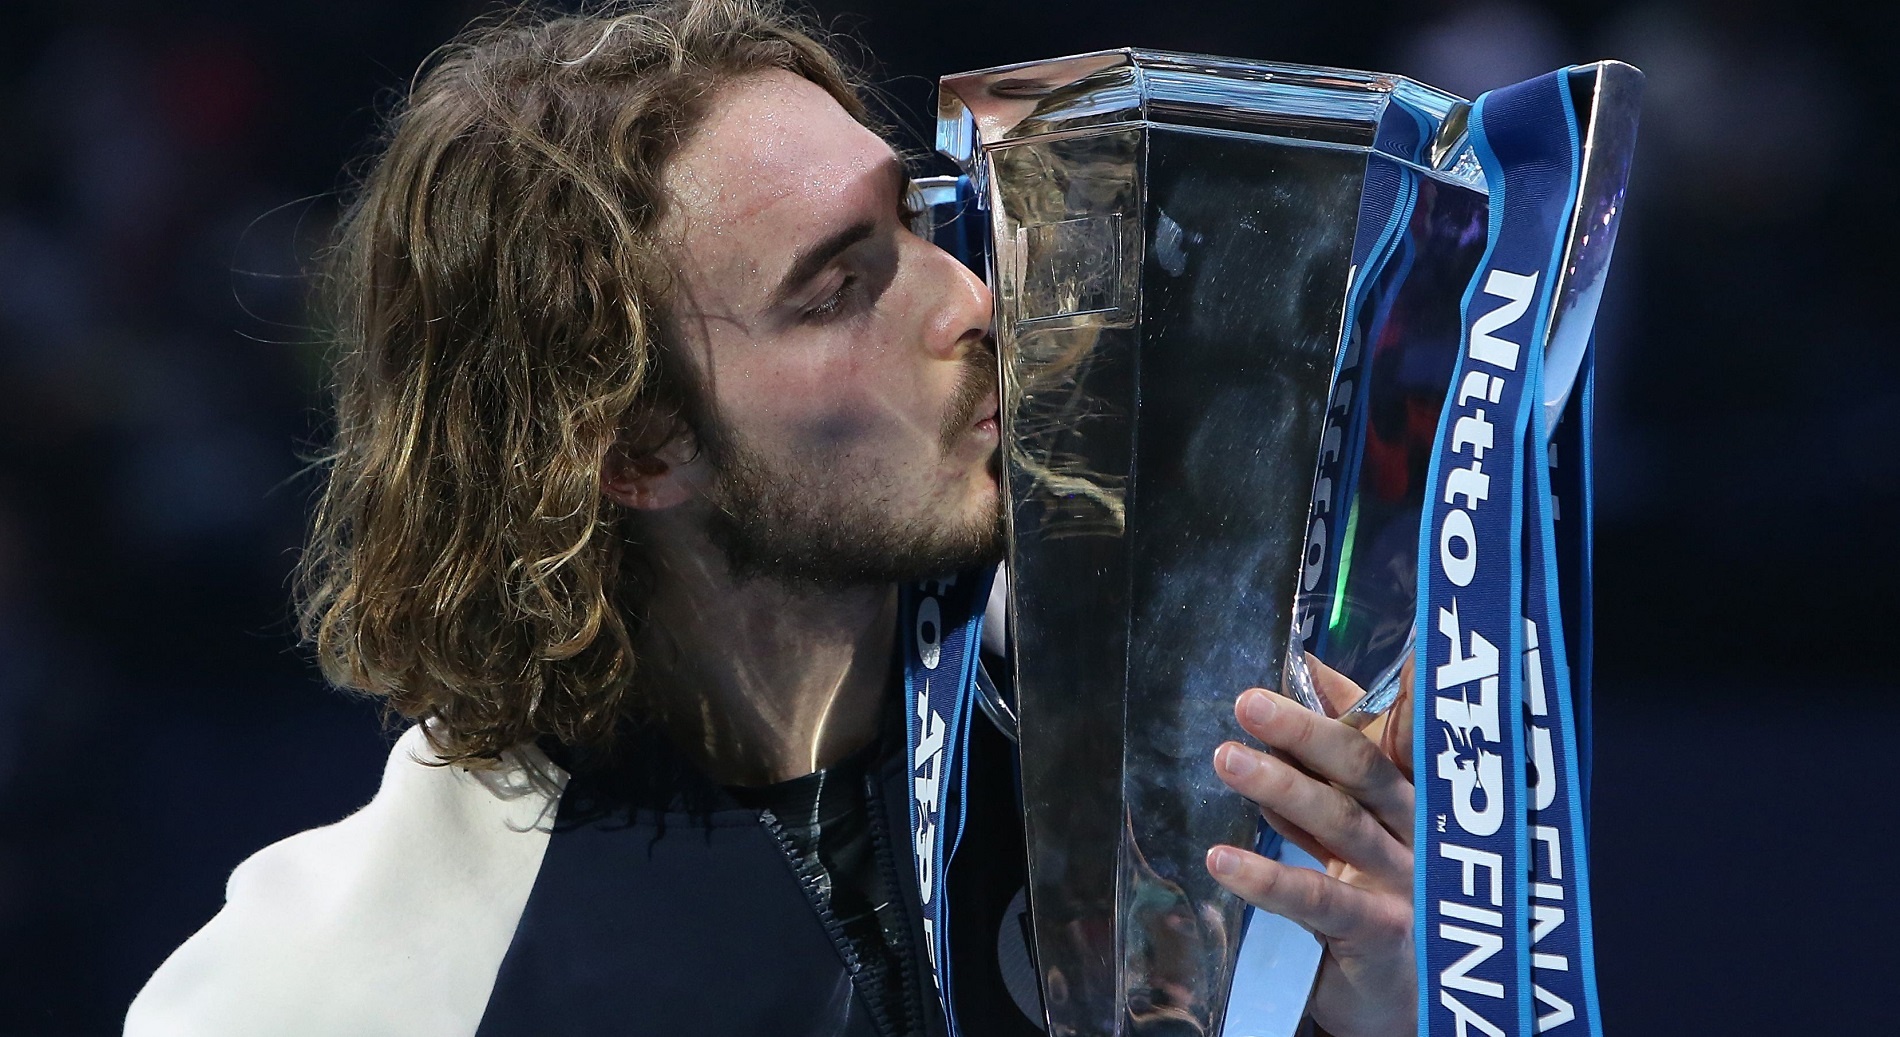 10 questions about the 2020 Nitto ATP Finals - Dates, schedule, qualified players, protocols